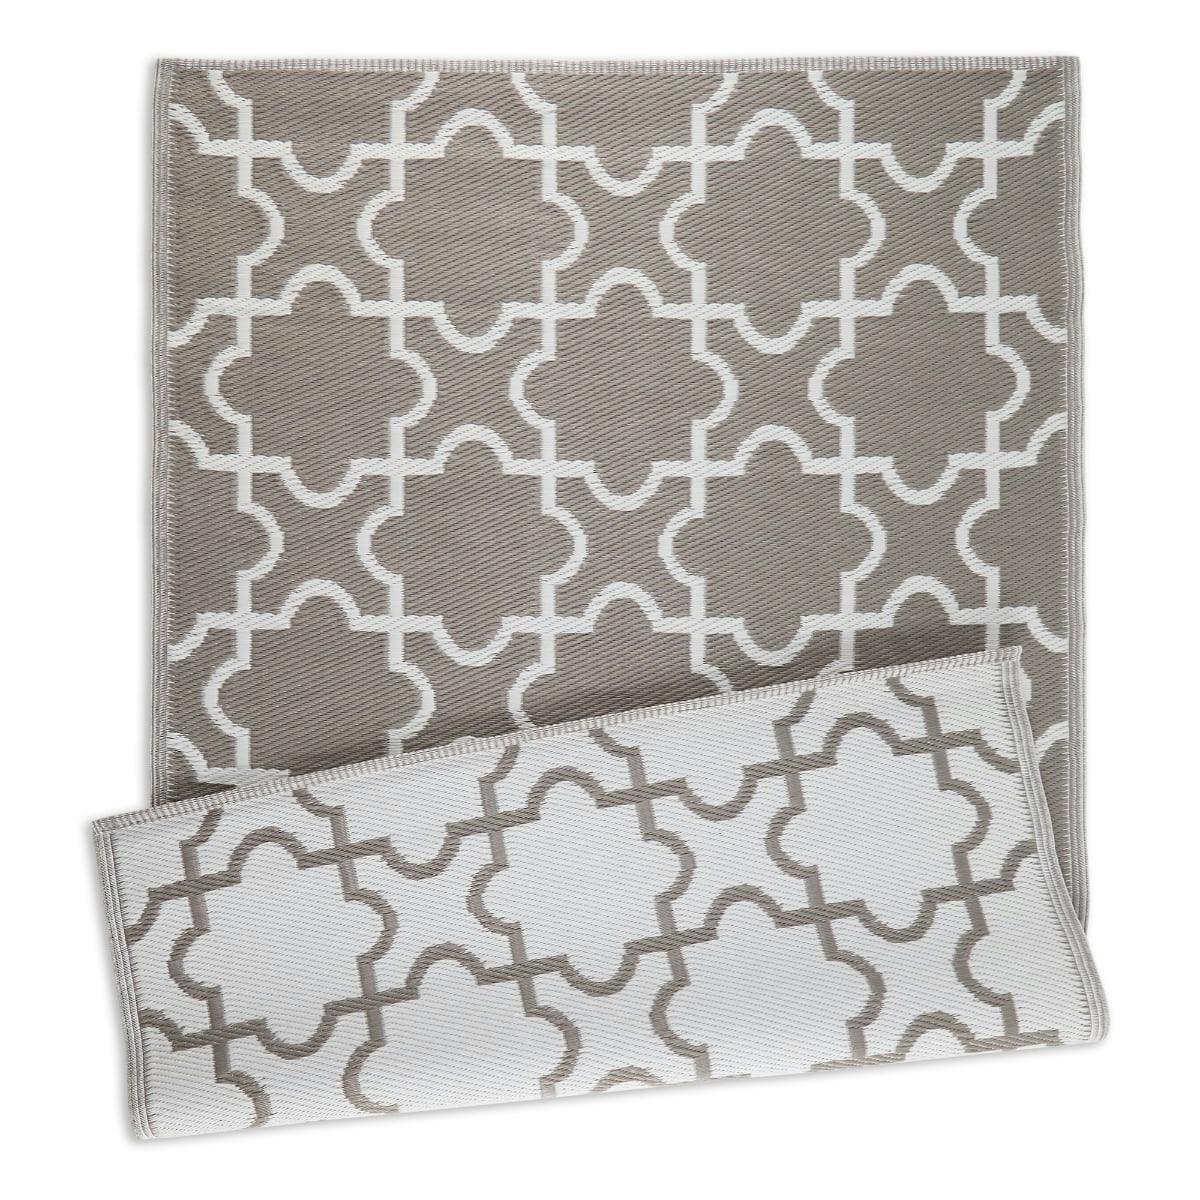 Stone Gray and White Quatrefoil 4' x 6' Reversible Outdoor Rug